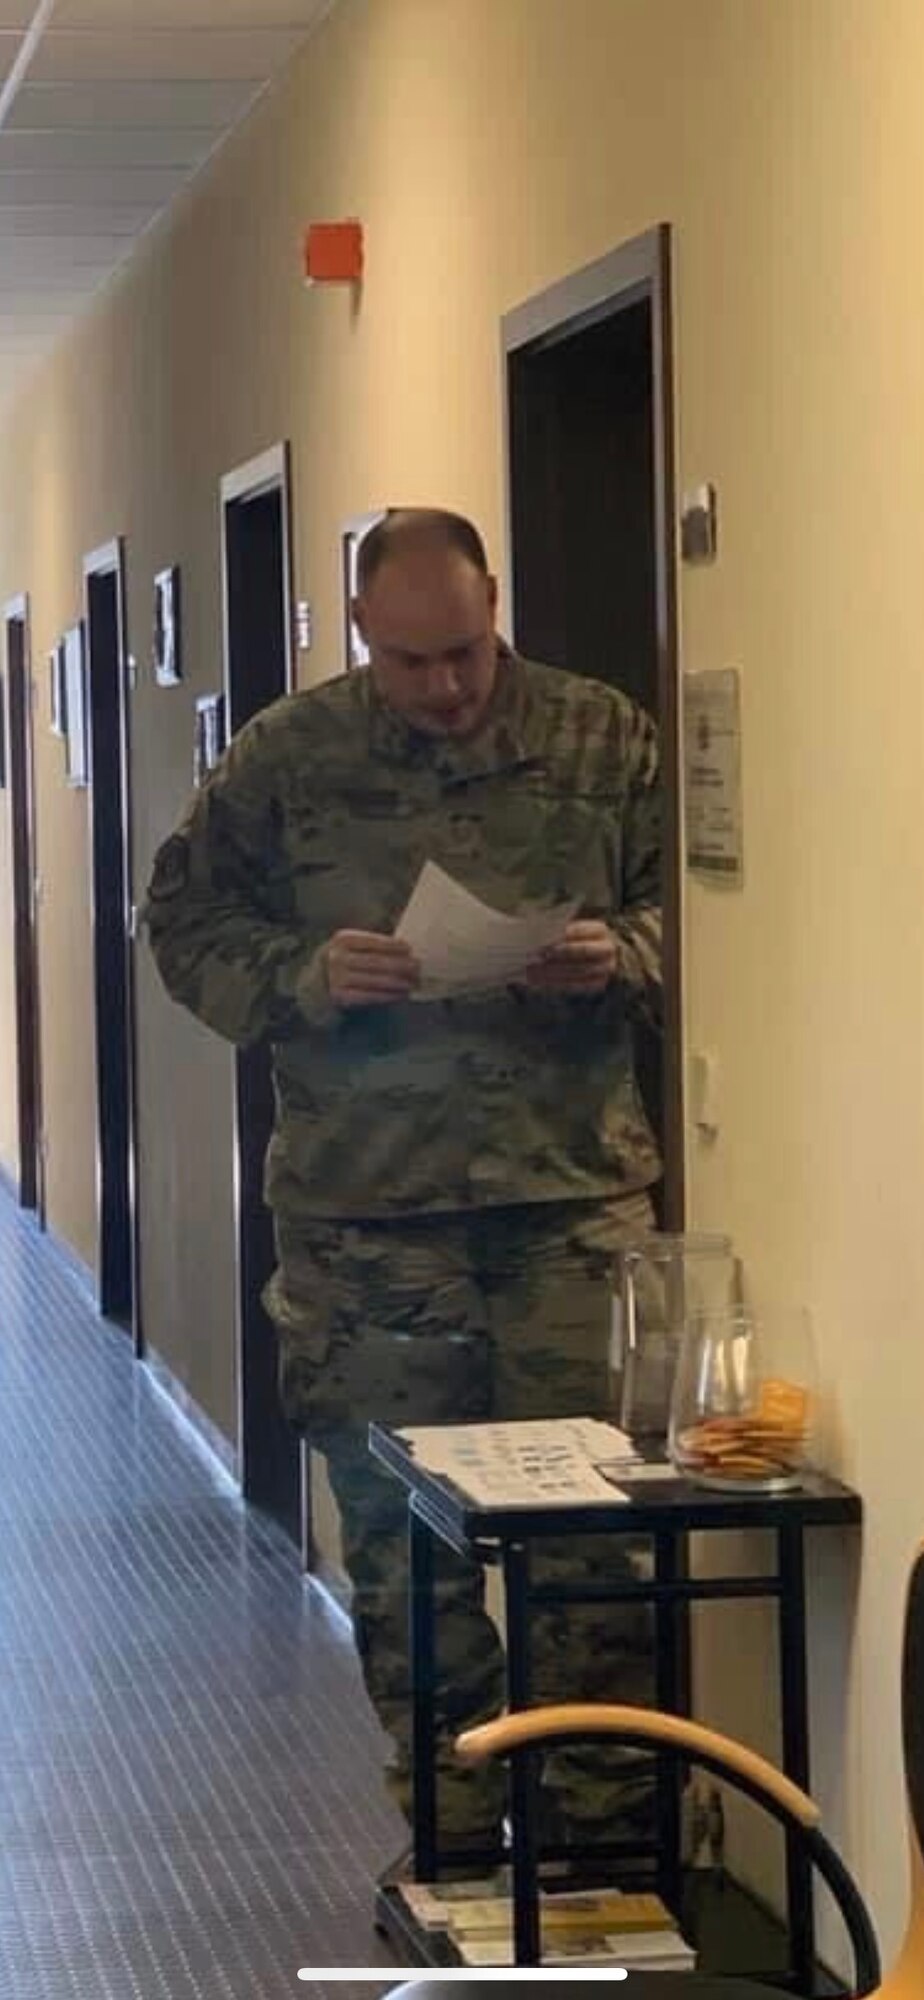 U.S. Air Force Technical Sgt. Addison Stemmer, 702nd Munitions Support Squadron NCOIC of the medical unit, reviews paperwork March 31, 2020, at Buechel Air Base, Germany. Stemmer was selected to start full-time preparatory course work for admission to medical school. (Courtesy photo by 702 MUNSS)